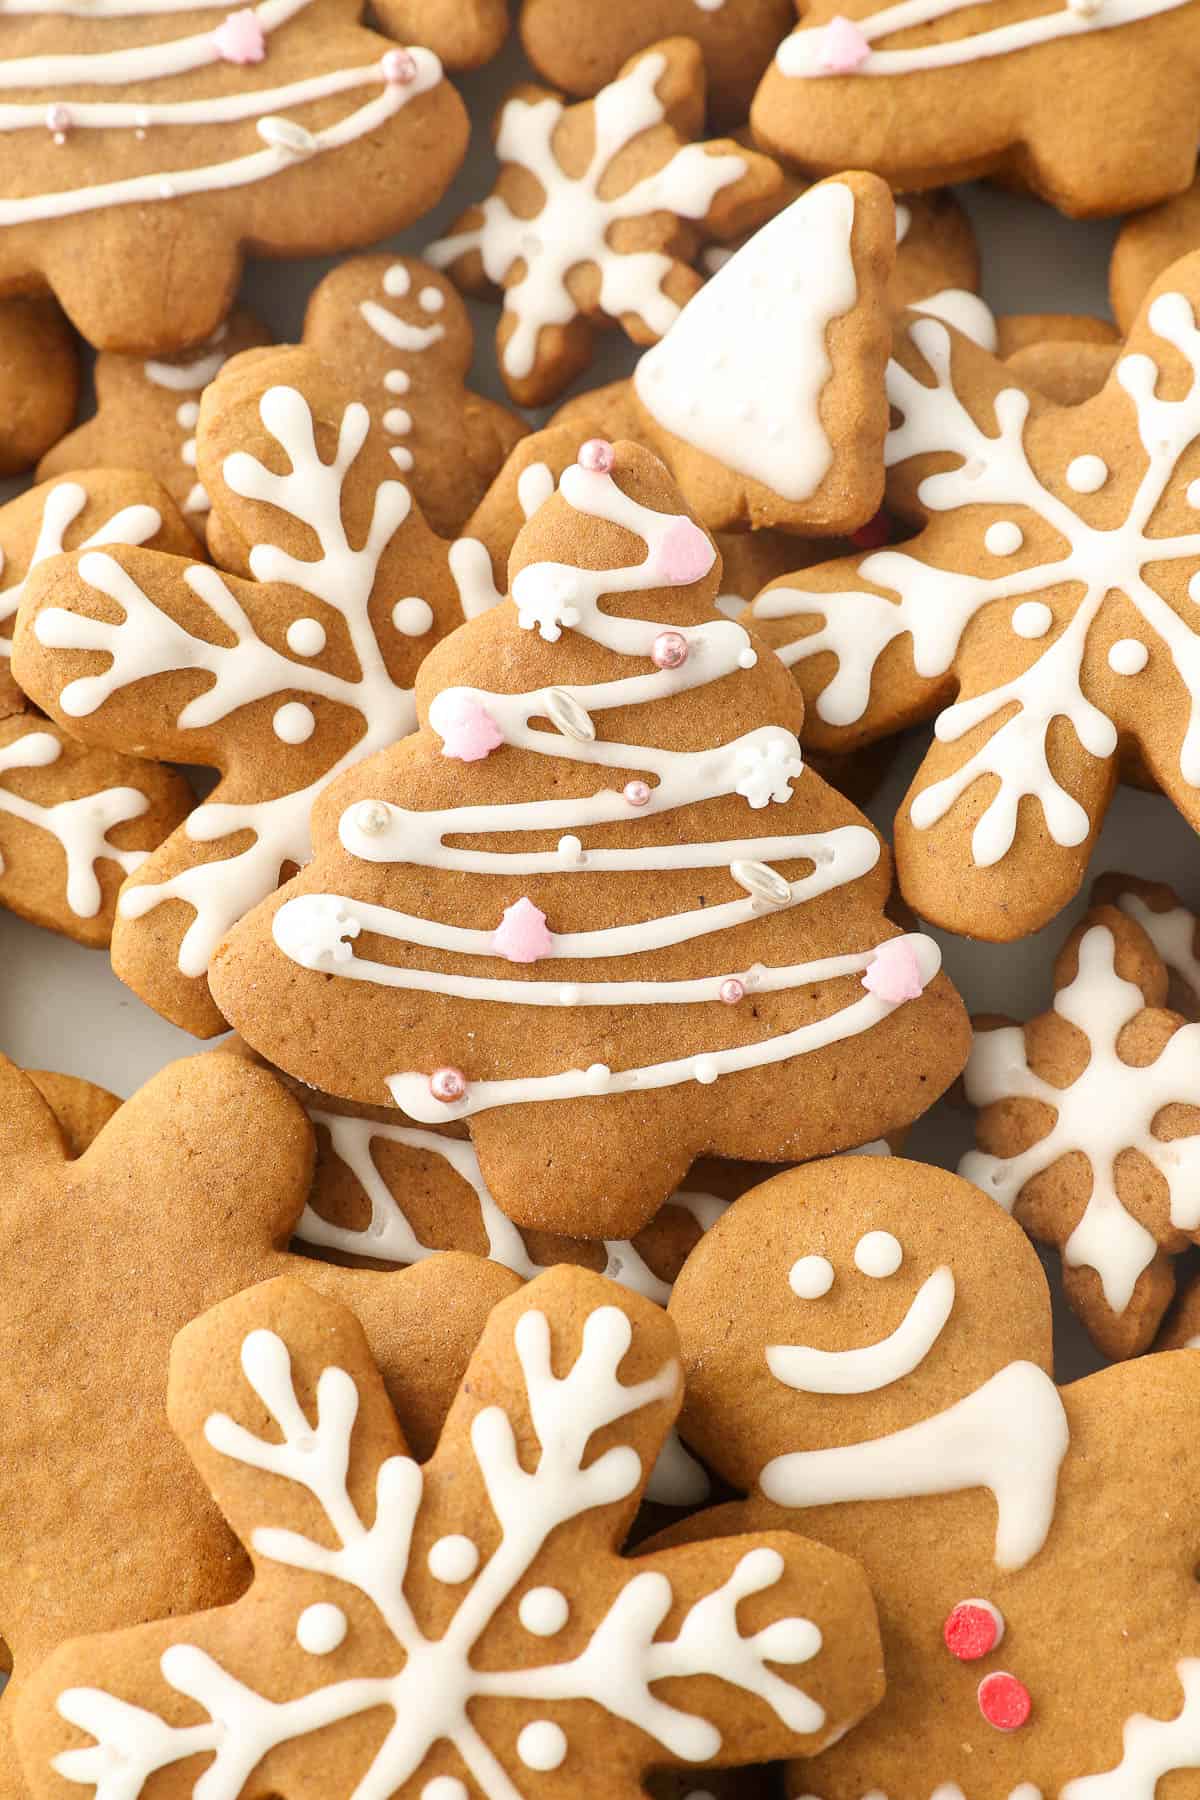 Gingerbread cookies cutout like Christmas trees and snowflakes